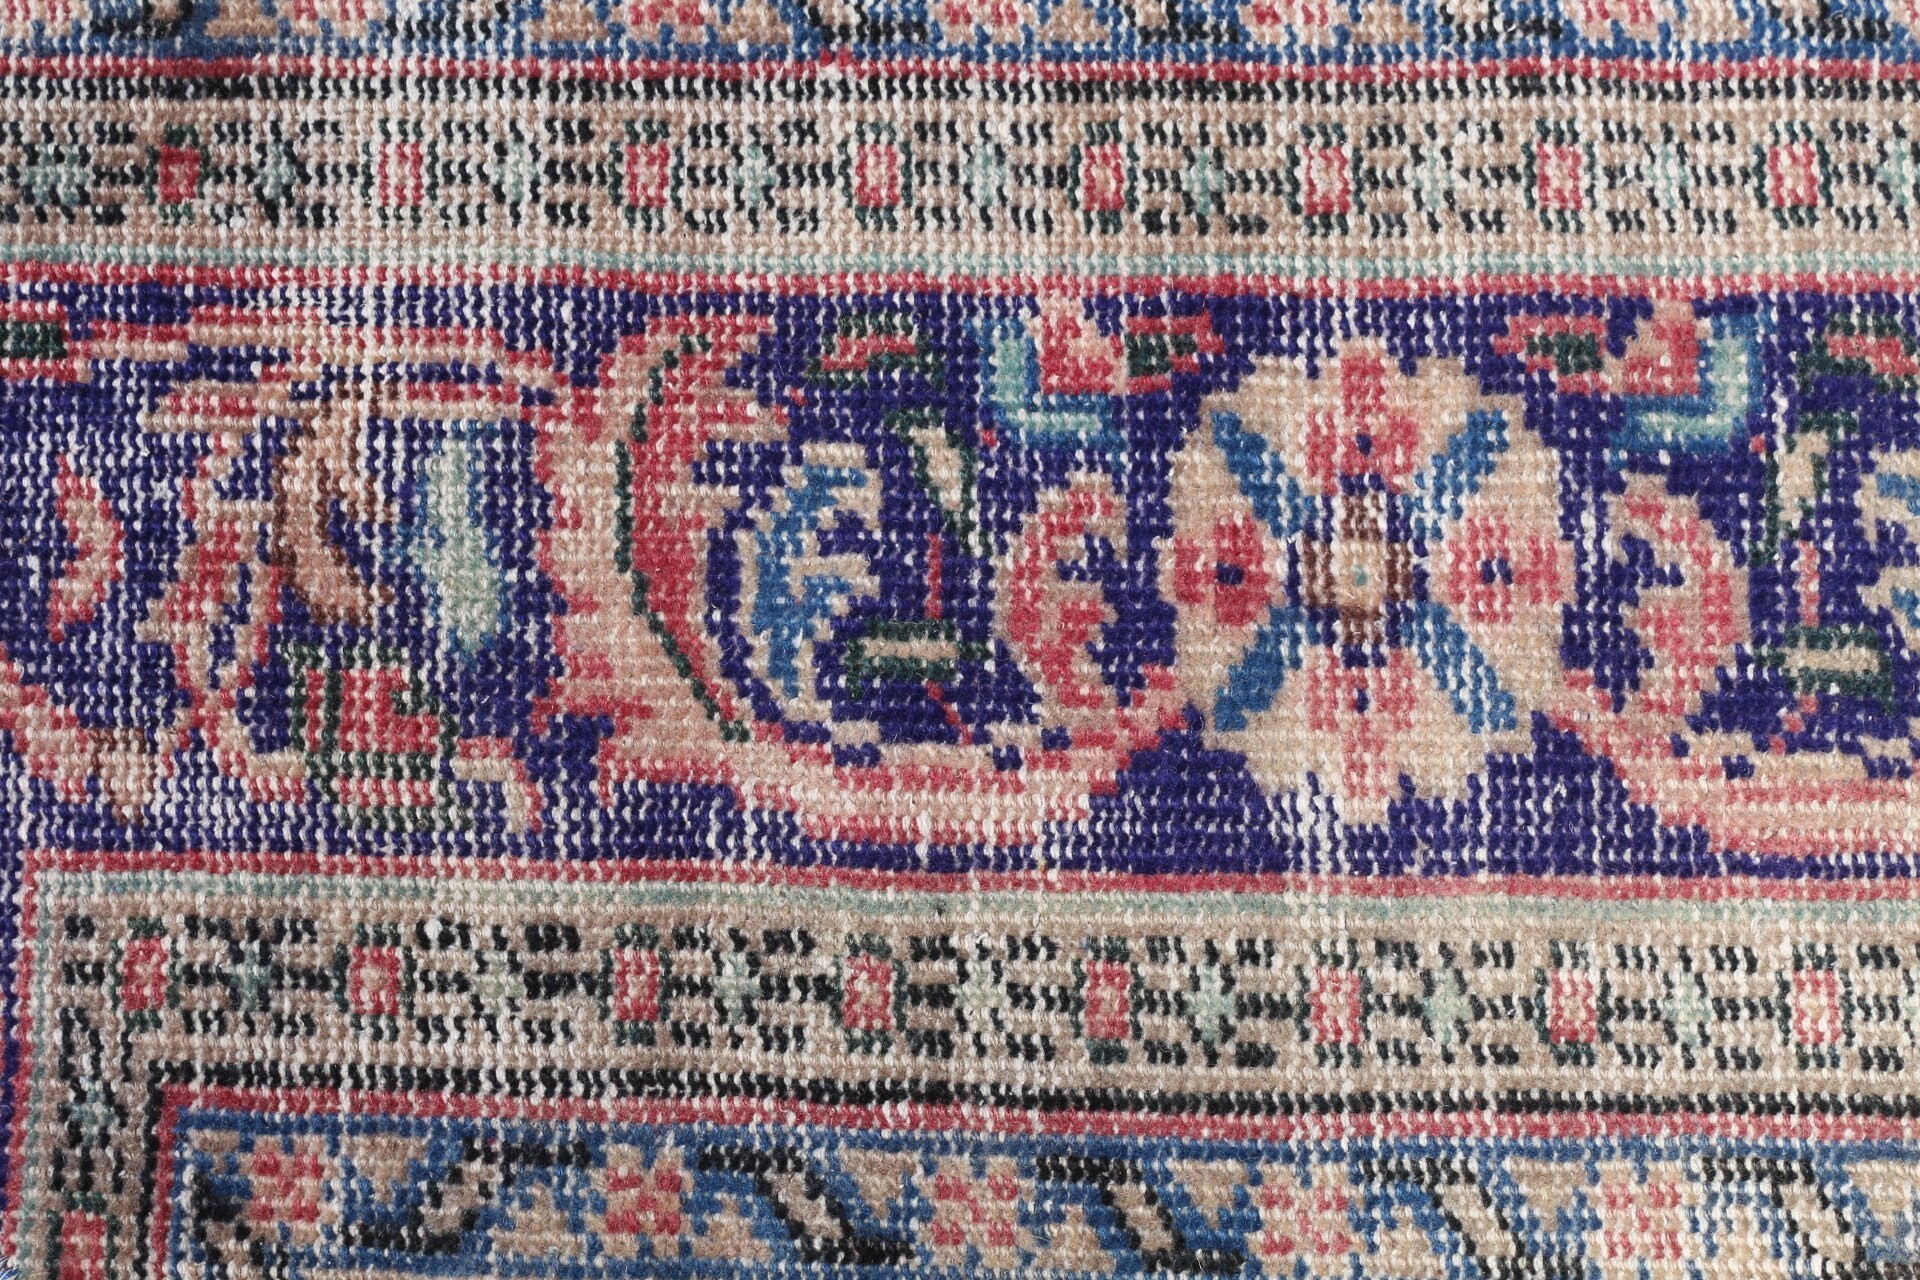 Vintage Rug, Oriental Rugs, Abstract Rugs, Blue Oushak Rugs, Kitchen Rug, 1.5x2.5 ft Small Rugs, Car Mat Rugs, Bedroom Rugs, Turkish Rug